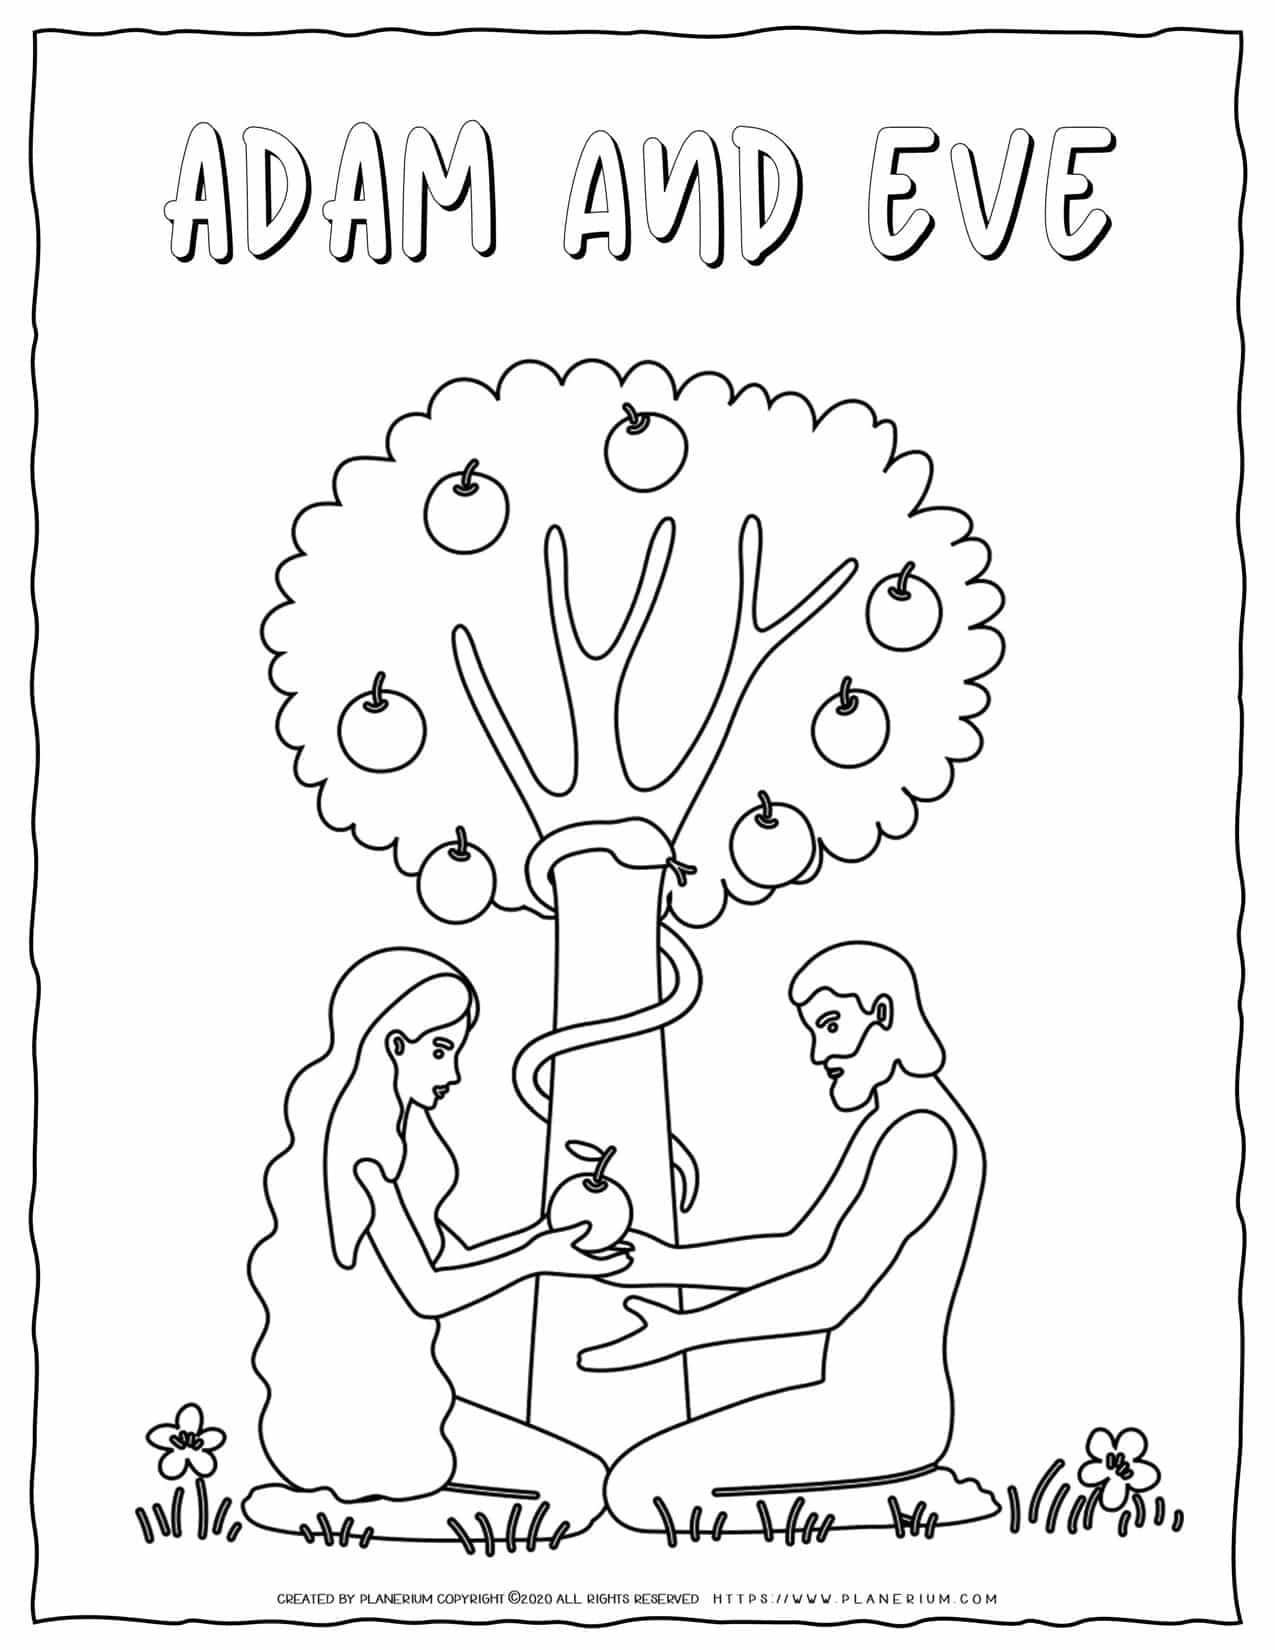 adam-and-eve-bible-coloring-pages-planerium